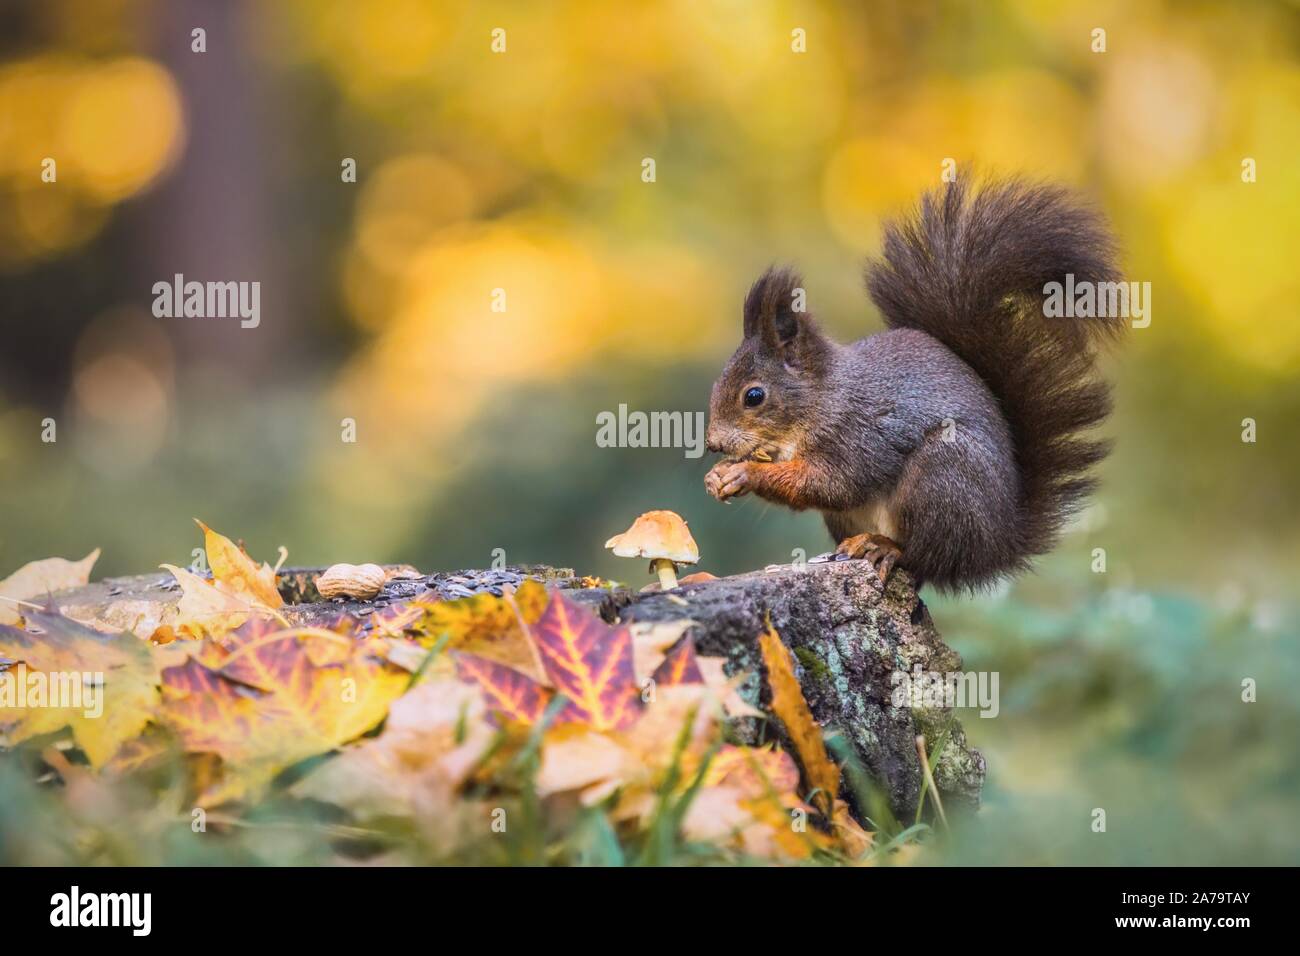 Cute hungry red squirrel sitting on a tree stump covered with colorful leaves and a mushroom feeding on seeds. Autumn day in a deep forest. Stock Photo